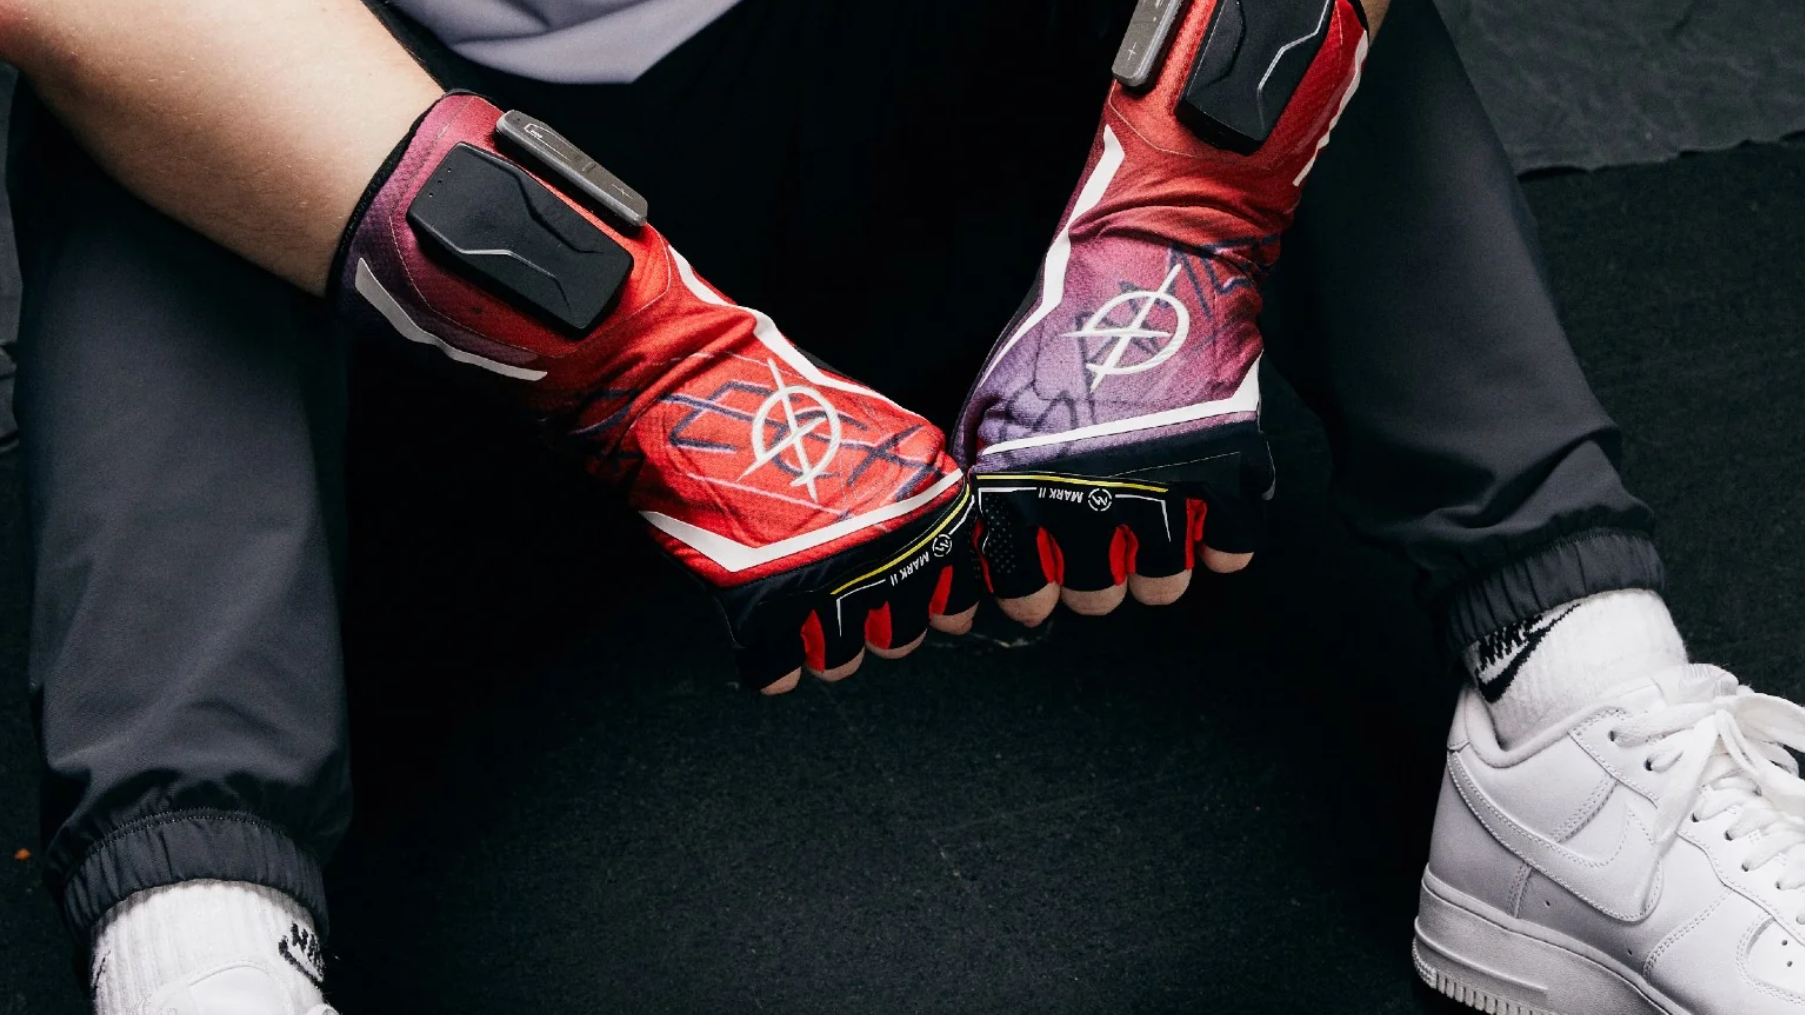 GamerTech's Magma Glove is a heated compression glove targeted at competitive gamers